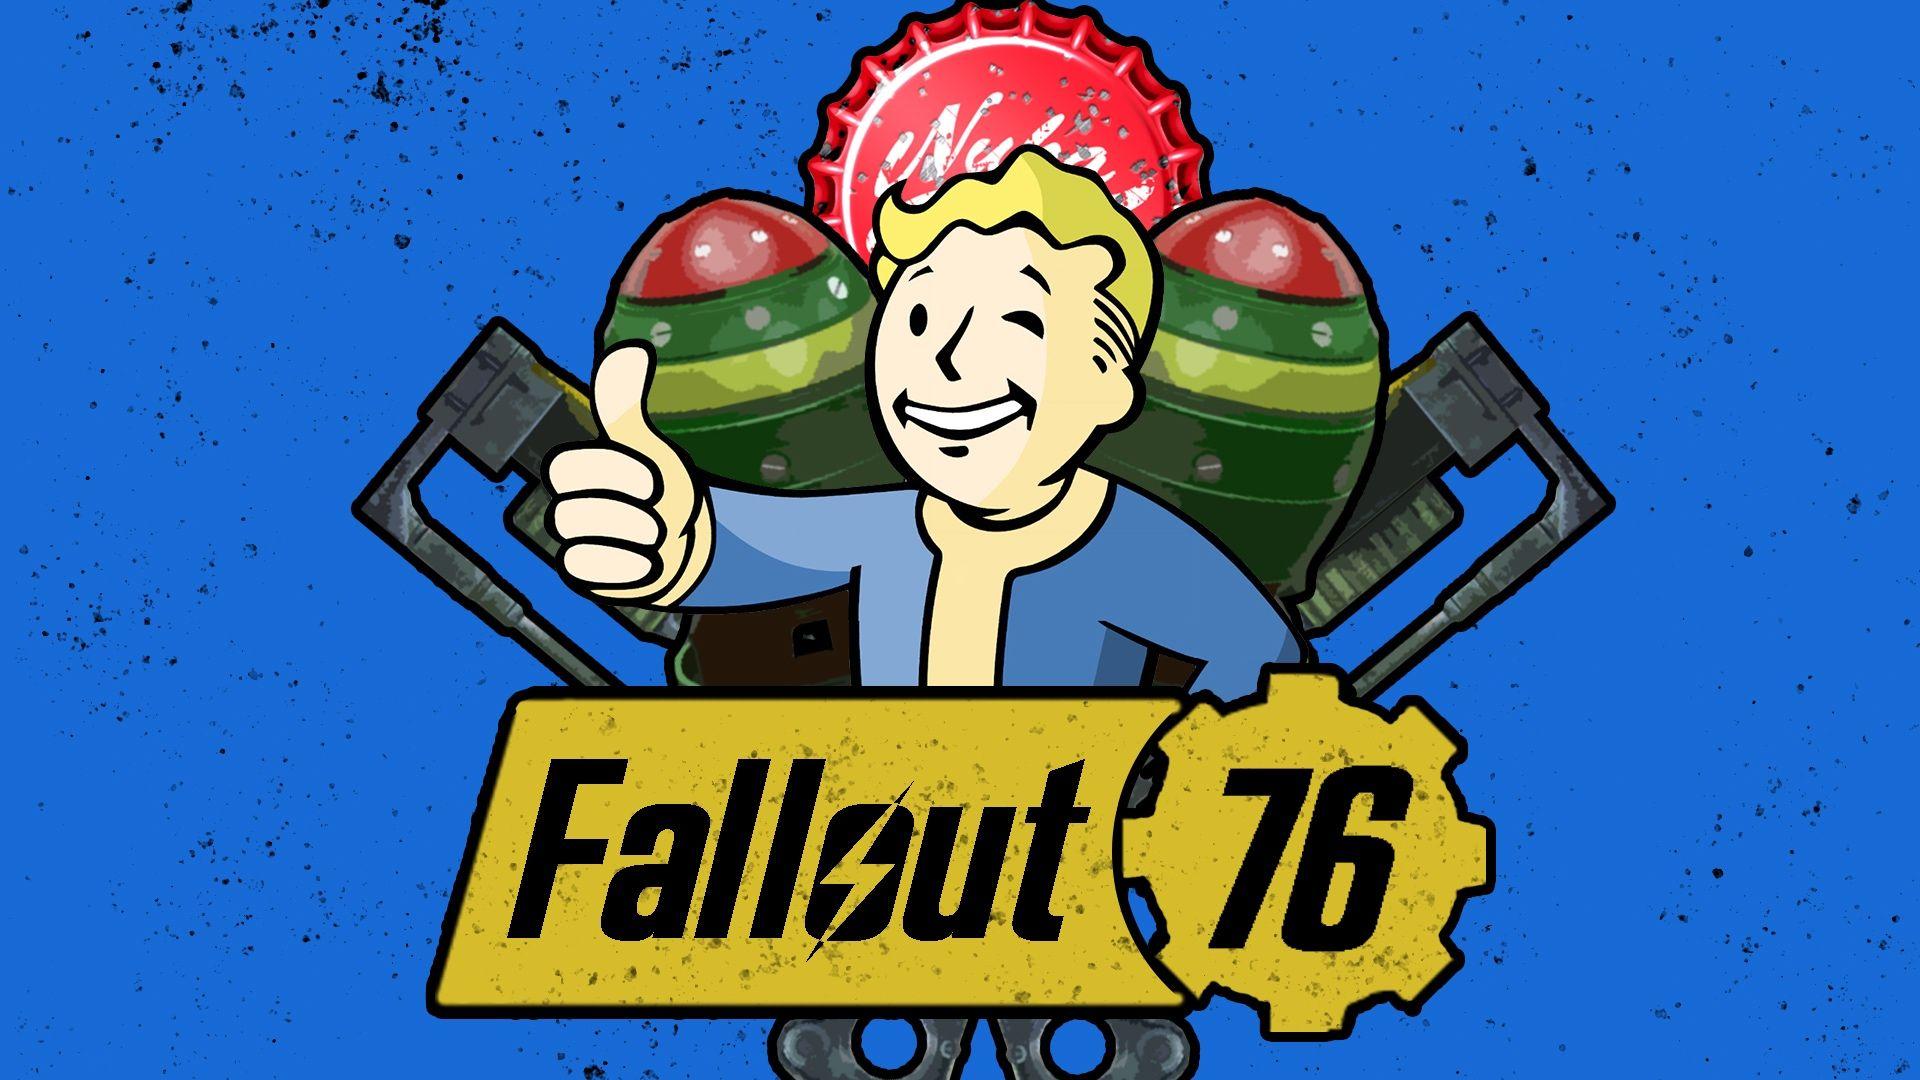 OC) Fallout 76 Wallpapers